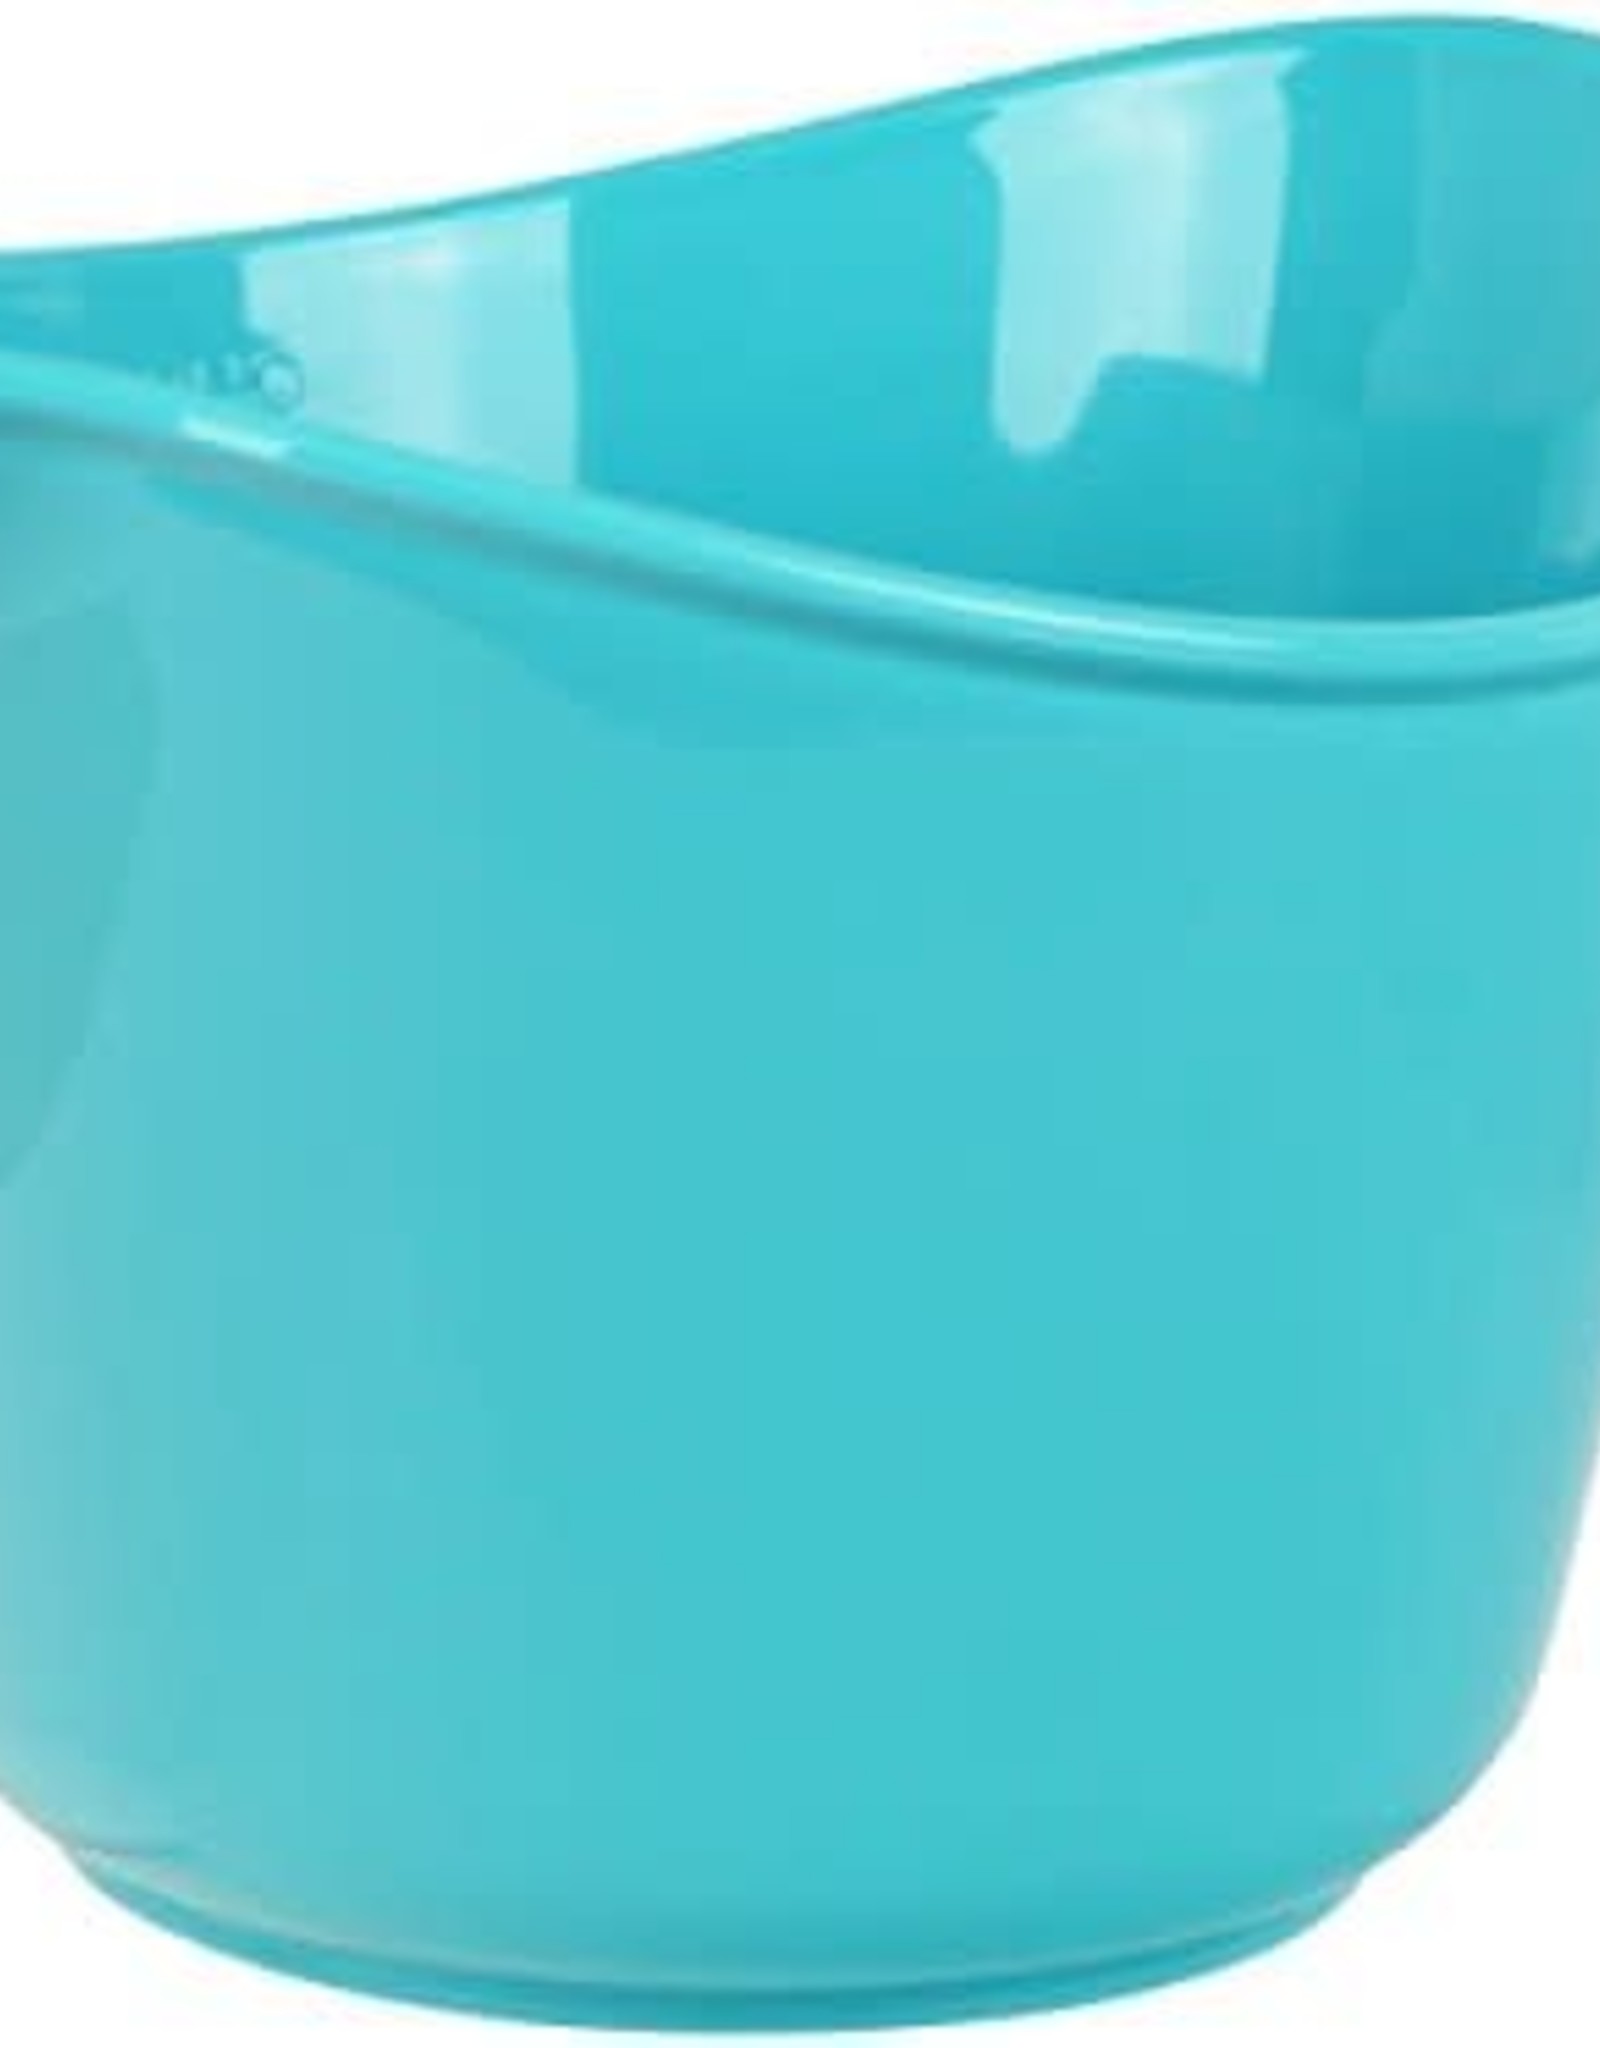 Microwave Batter Bowl - Turquoise